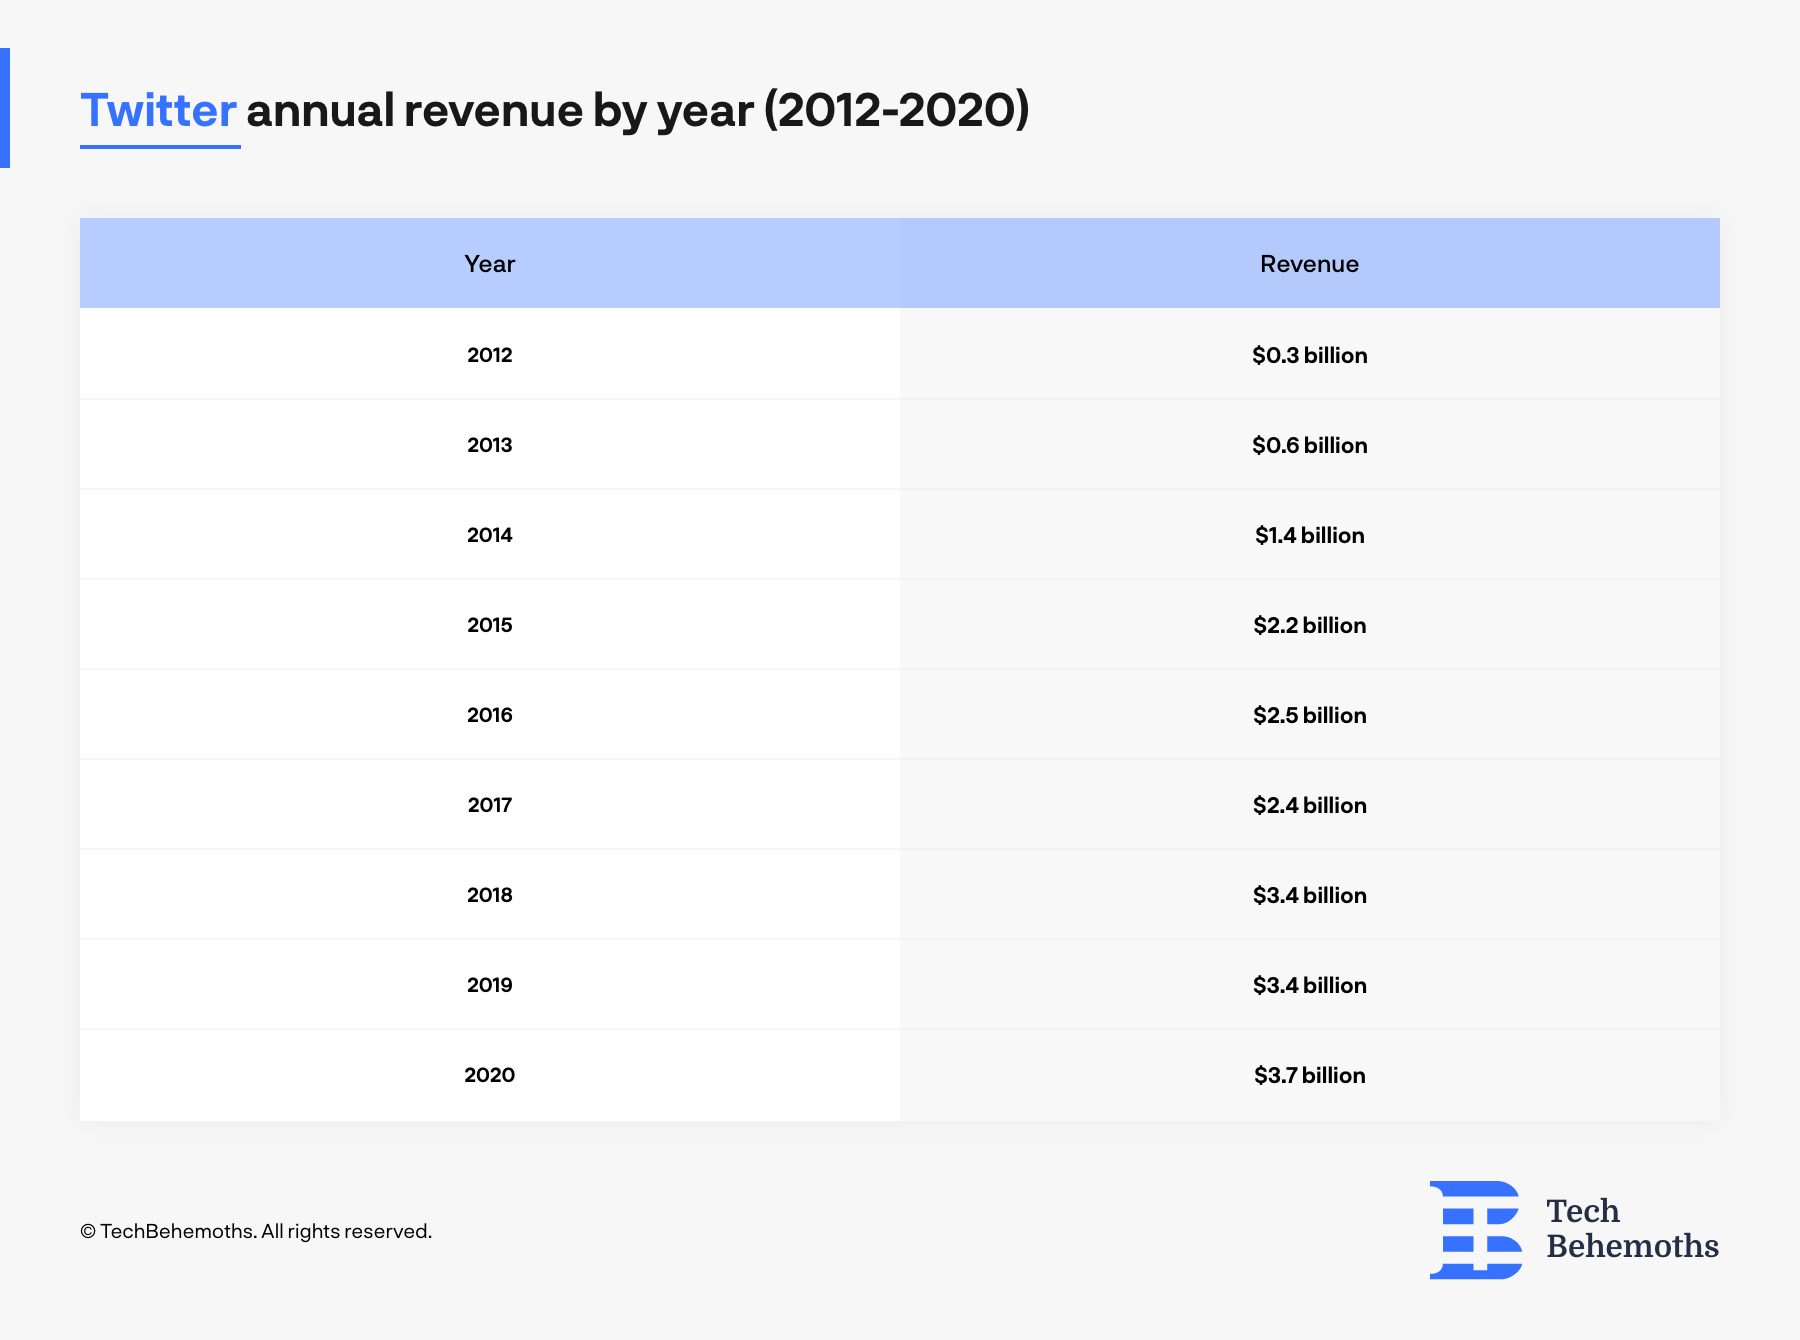 Year over Year Twitter revenue between 2012 - 2020